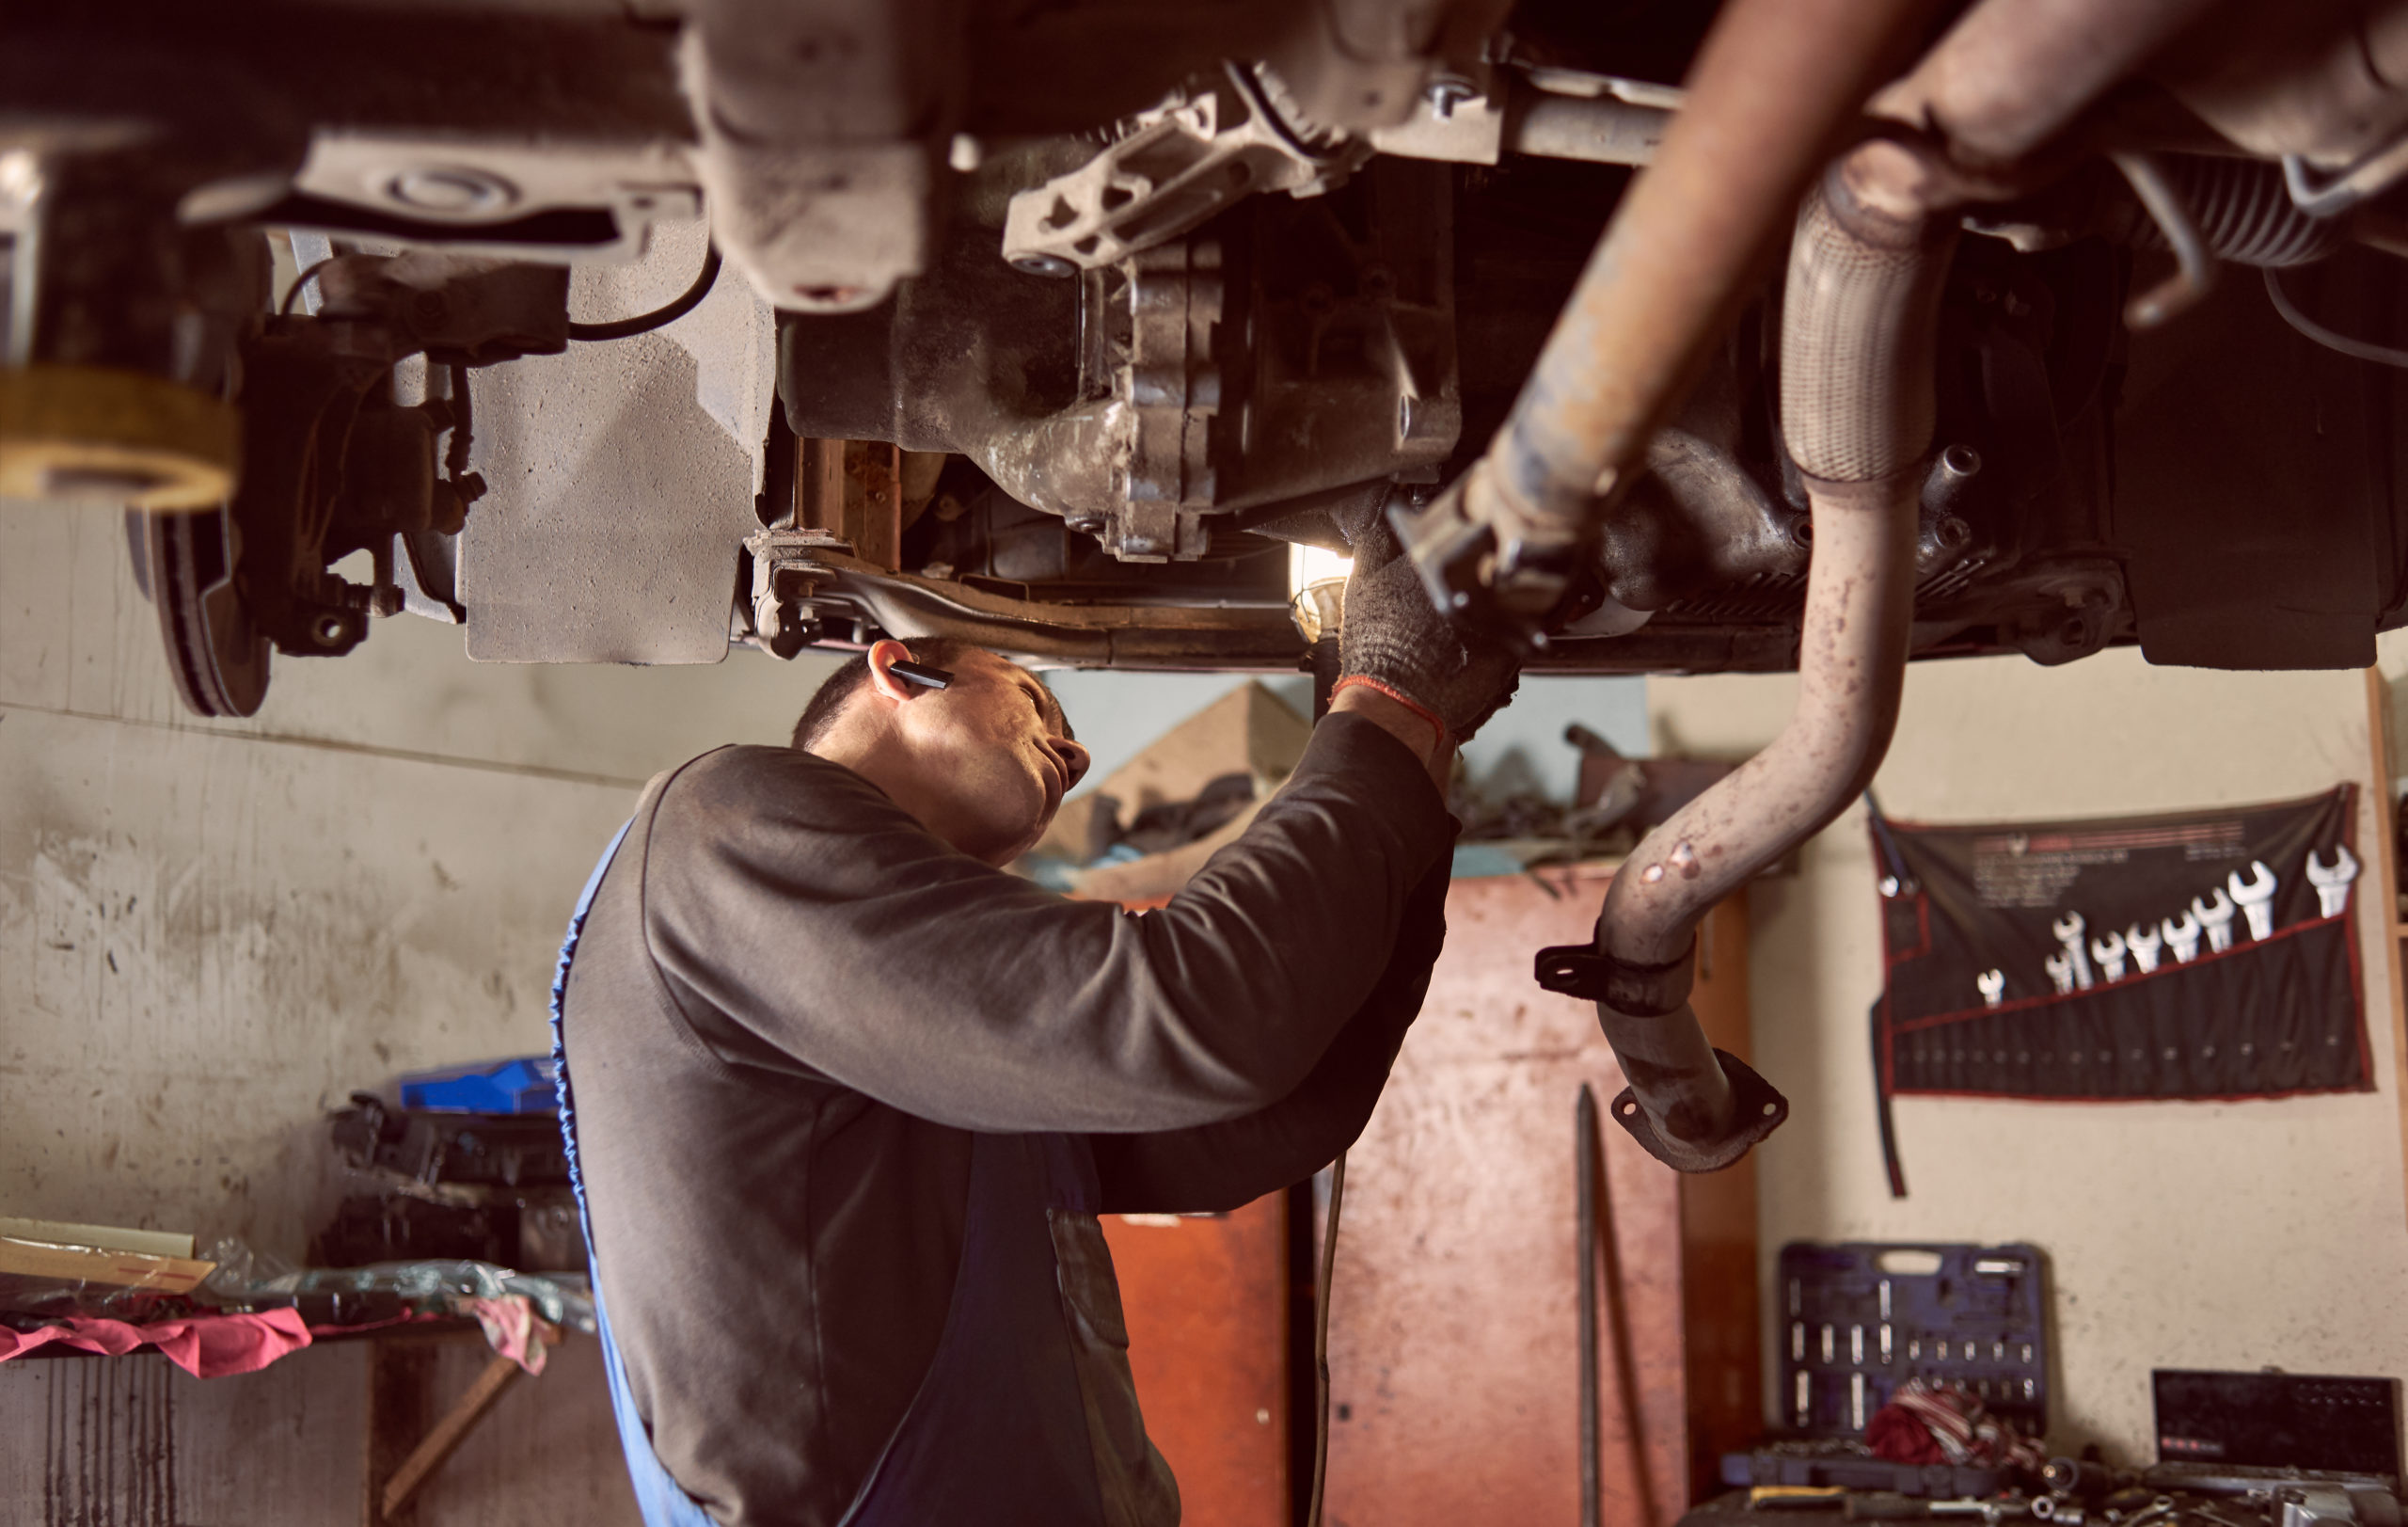 https://autolab.com.co/wp-content/uploads/side-cropped-view-of-auto-repairman-bending-under-2023-11-27-05-05-35-utc-1-scaled.jpg